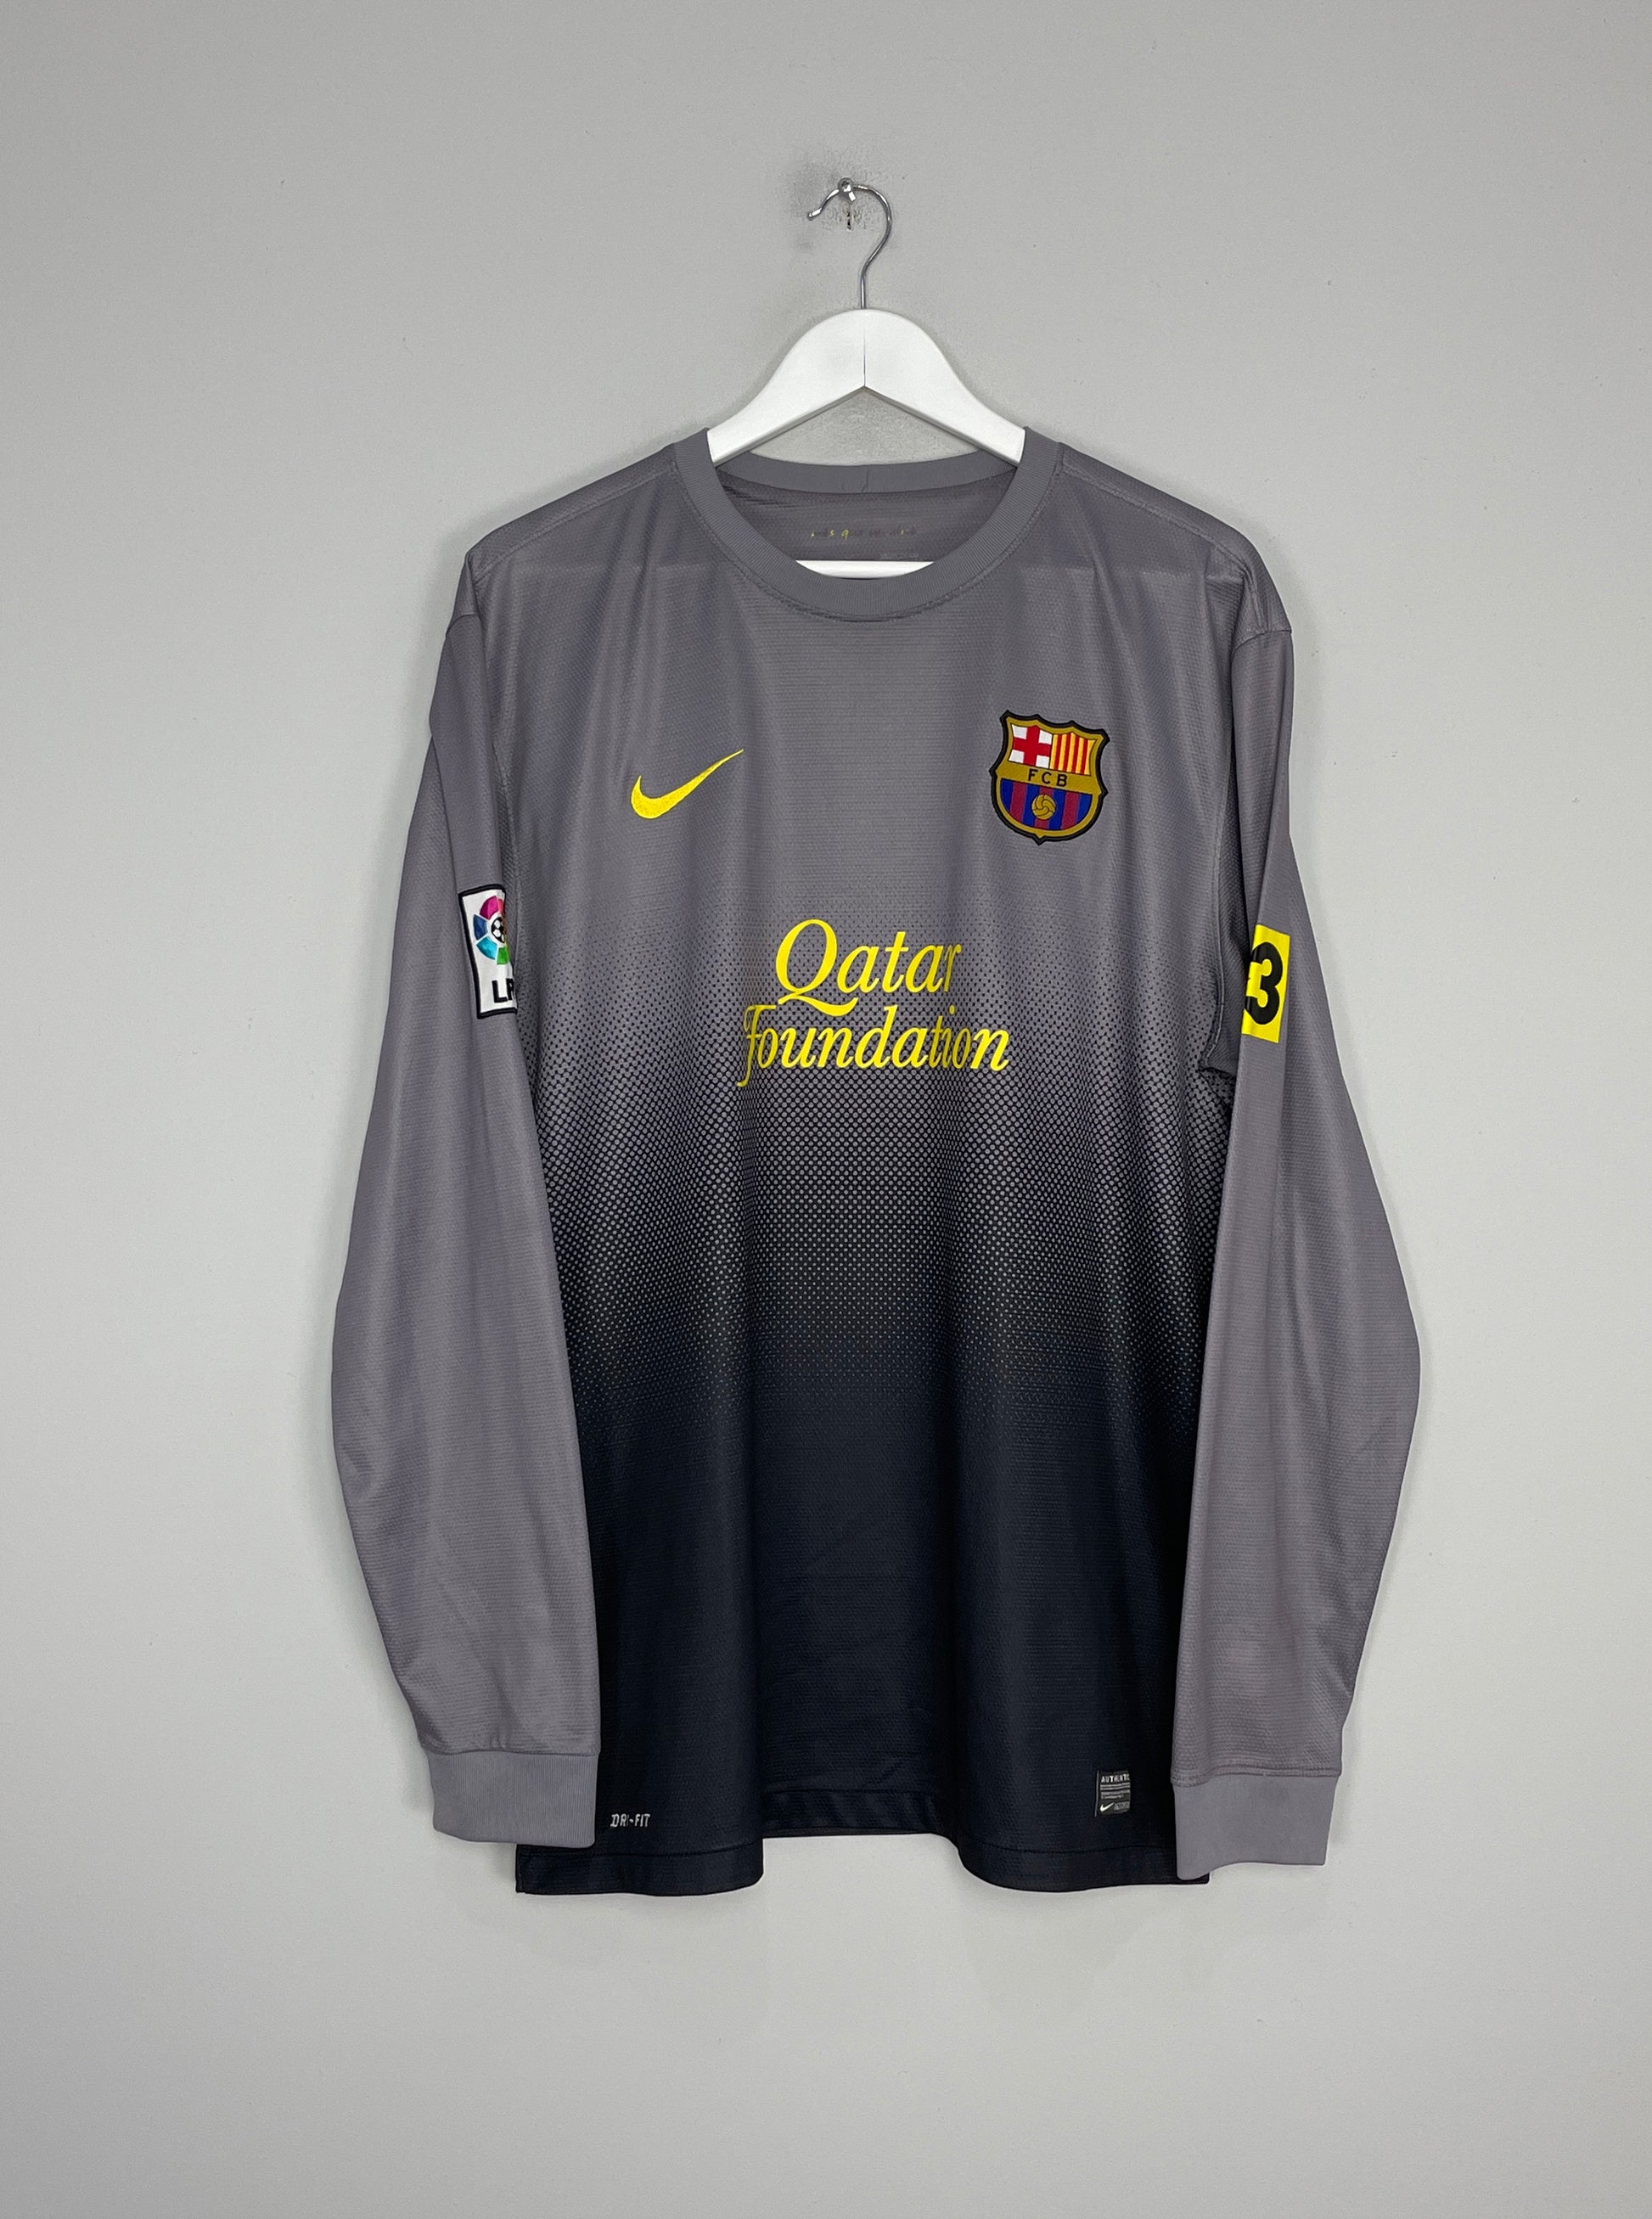 Image of the Barcelona shirt from the 2012/13 season